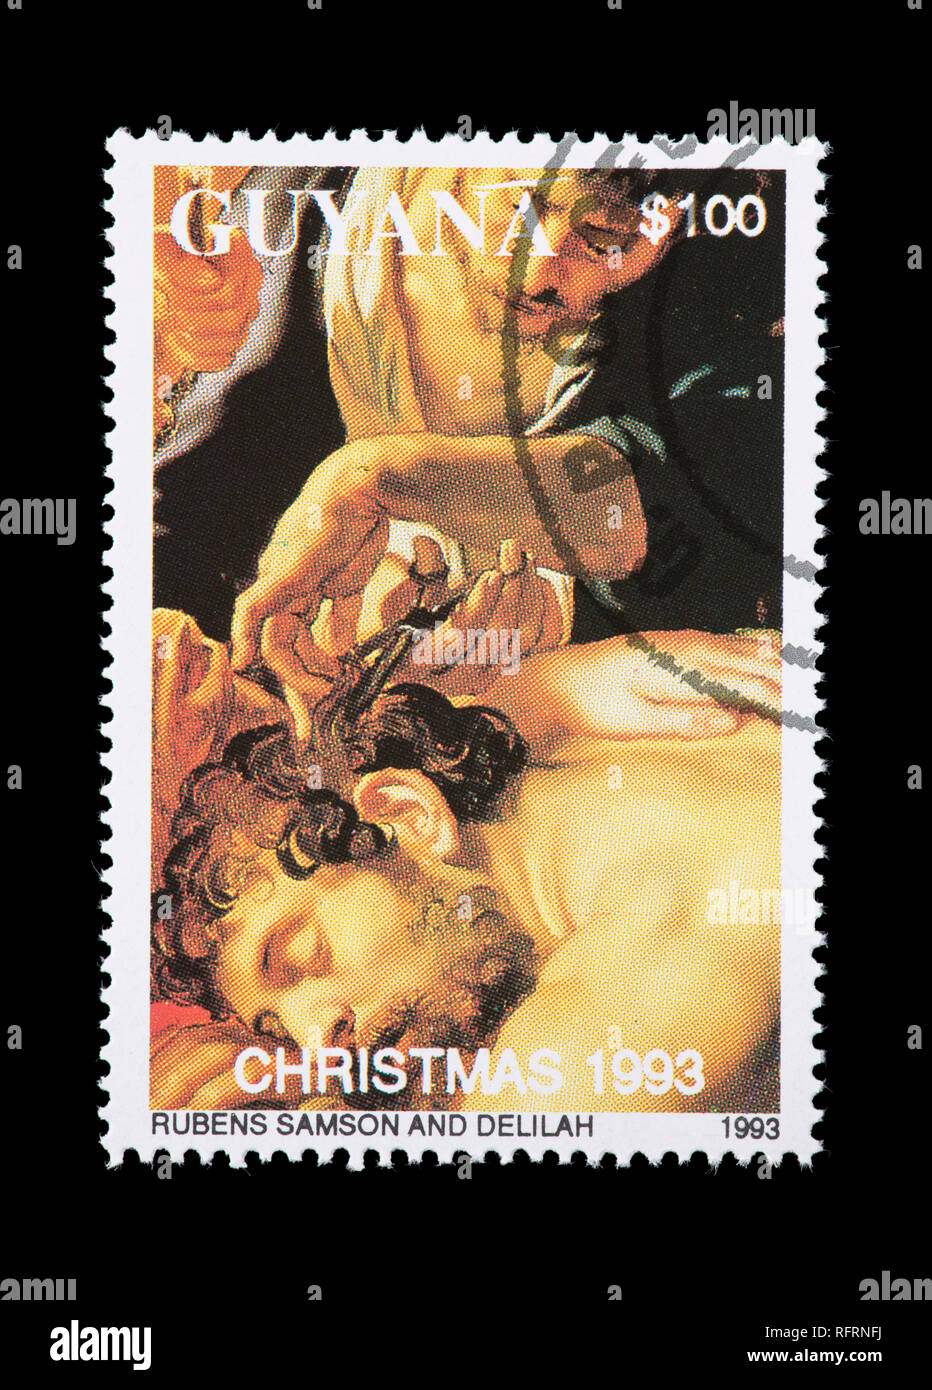 Postage stamp from Guyana depicting the Rubens painting Samson and Delilah Stock Photo